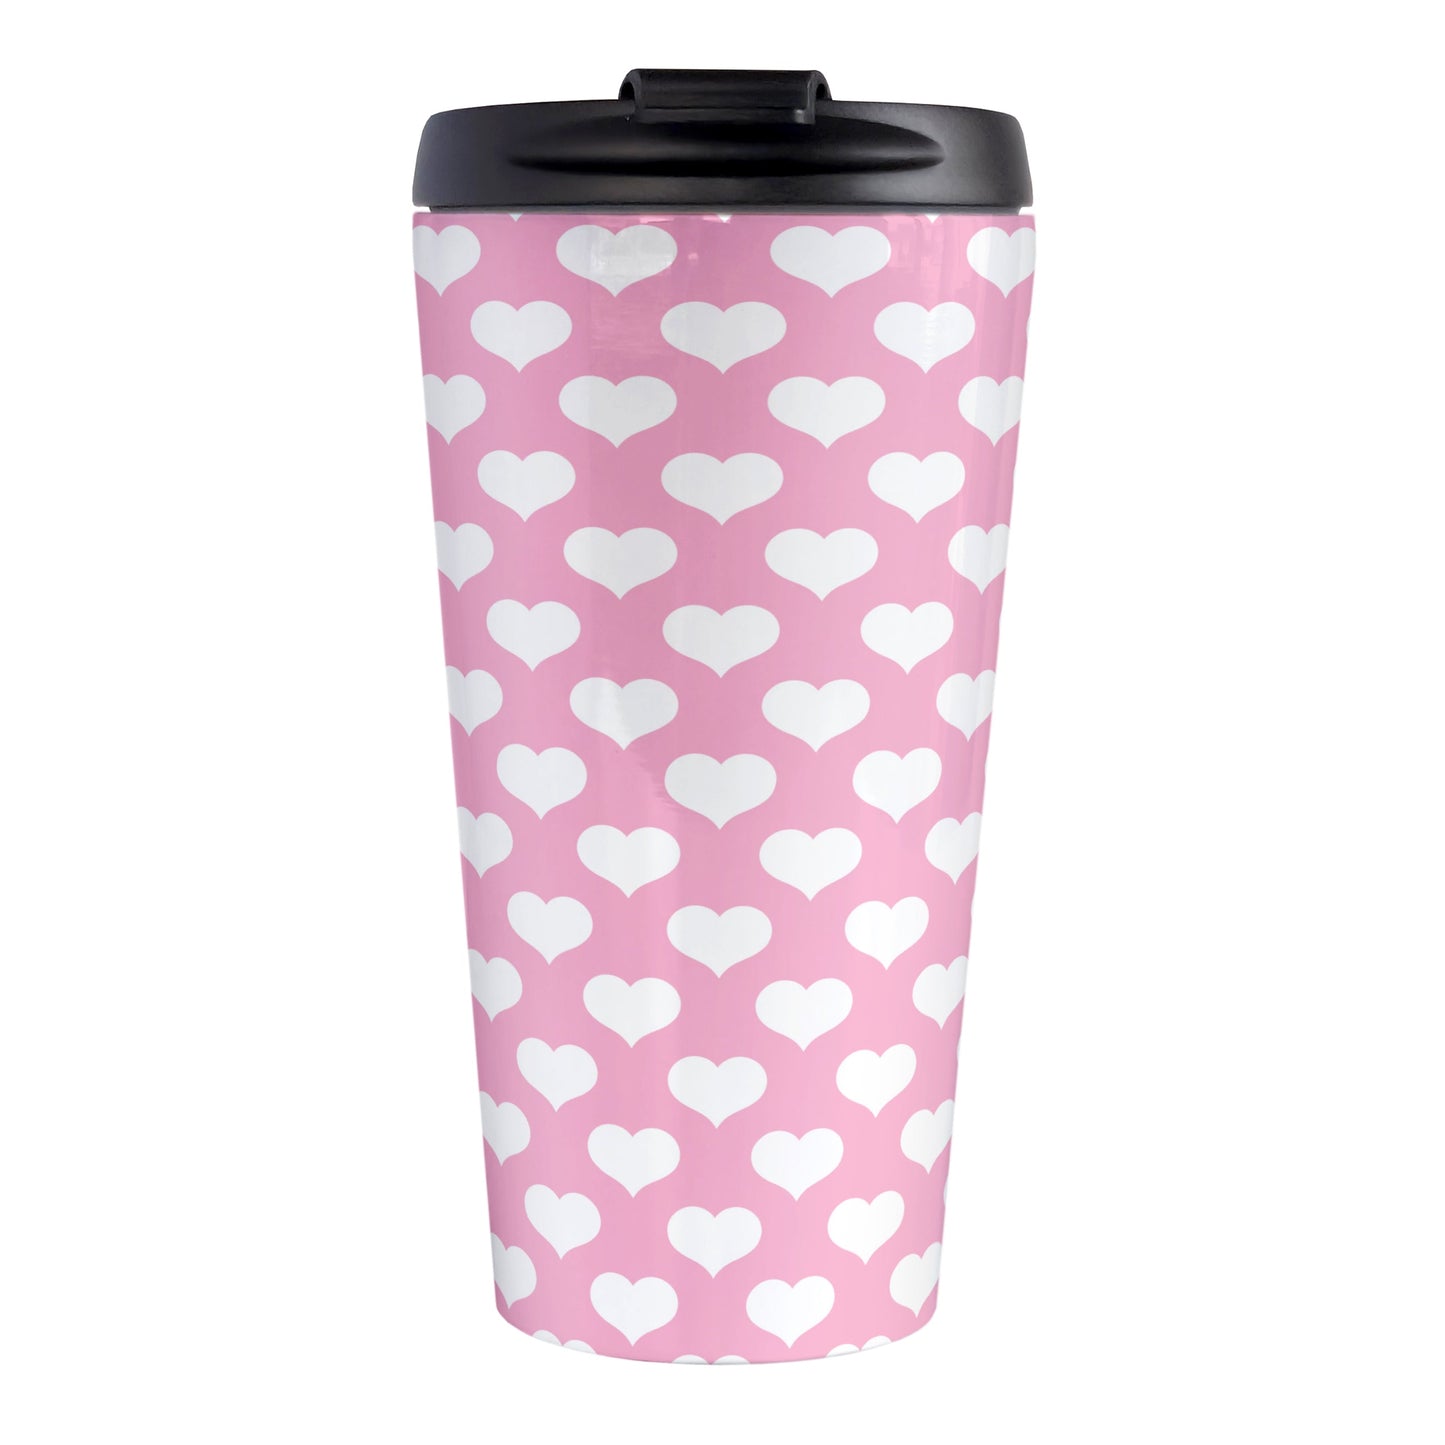 White Hearts Pattern Pink Travel Mug (15oz, stainless steel insulated) at Amy's Coffee Mugs